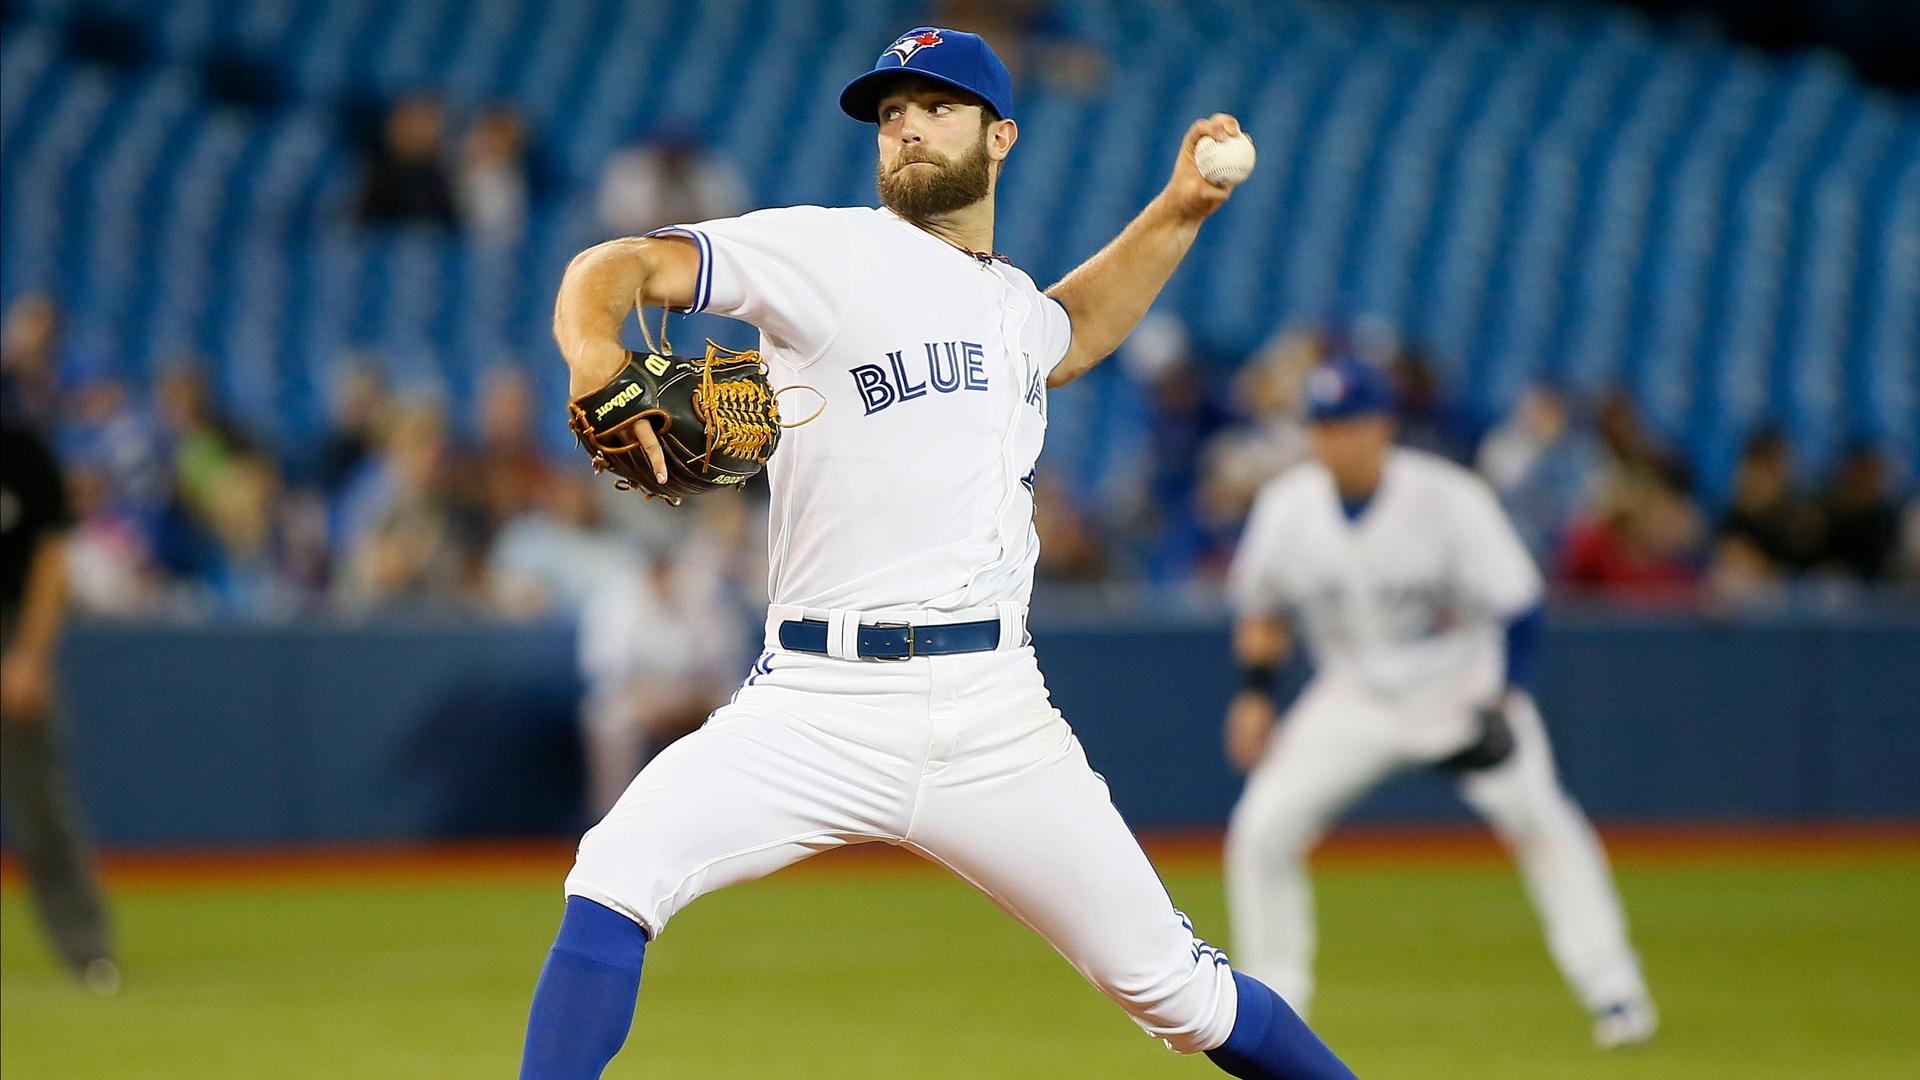  Toronto Blue Jays starting pitcher Daniel Norris throws against the Tampa Bay Rays in the fourth inning at the Rogers Centre.